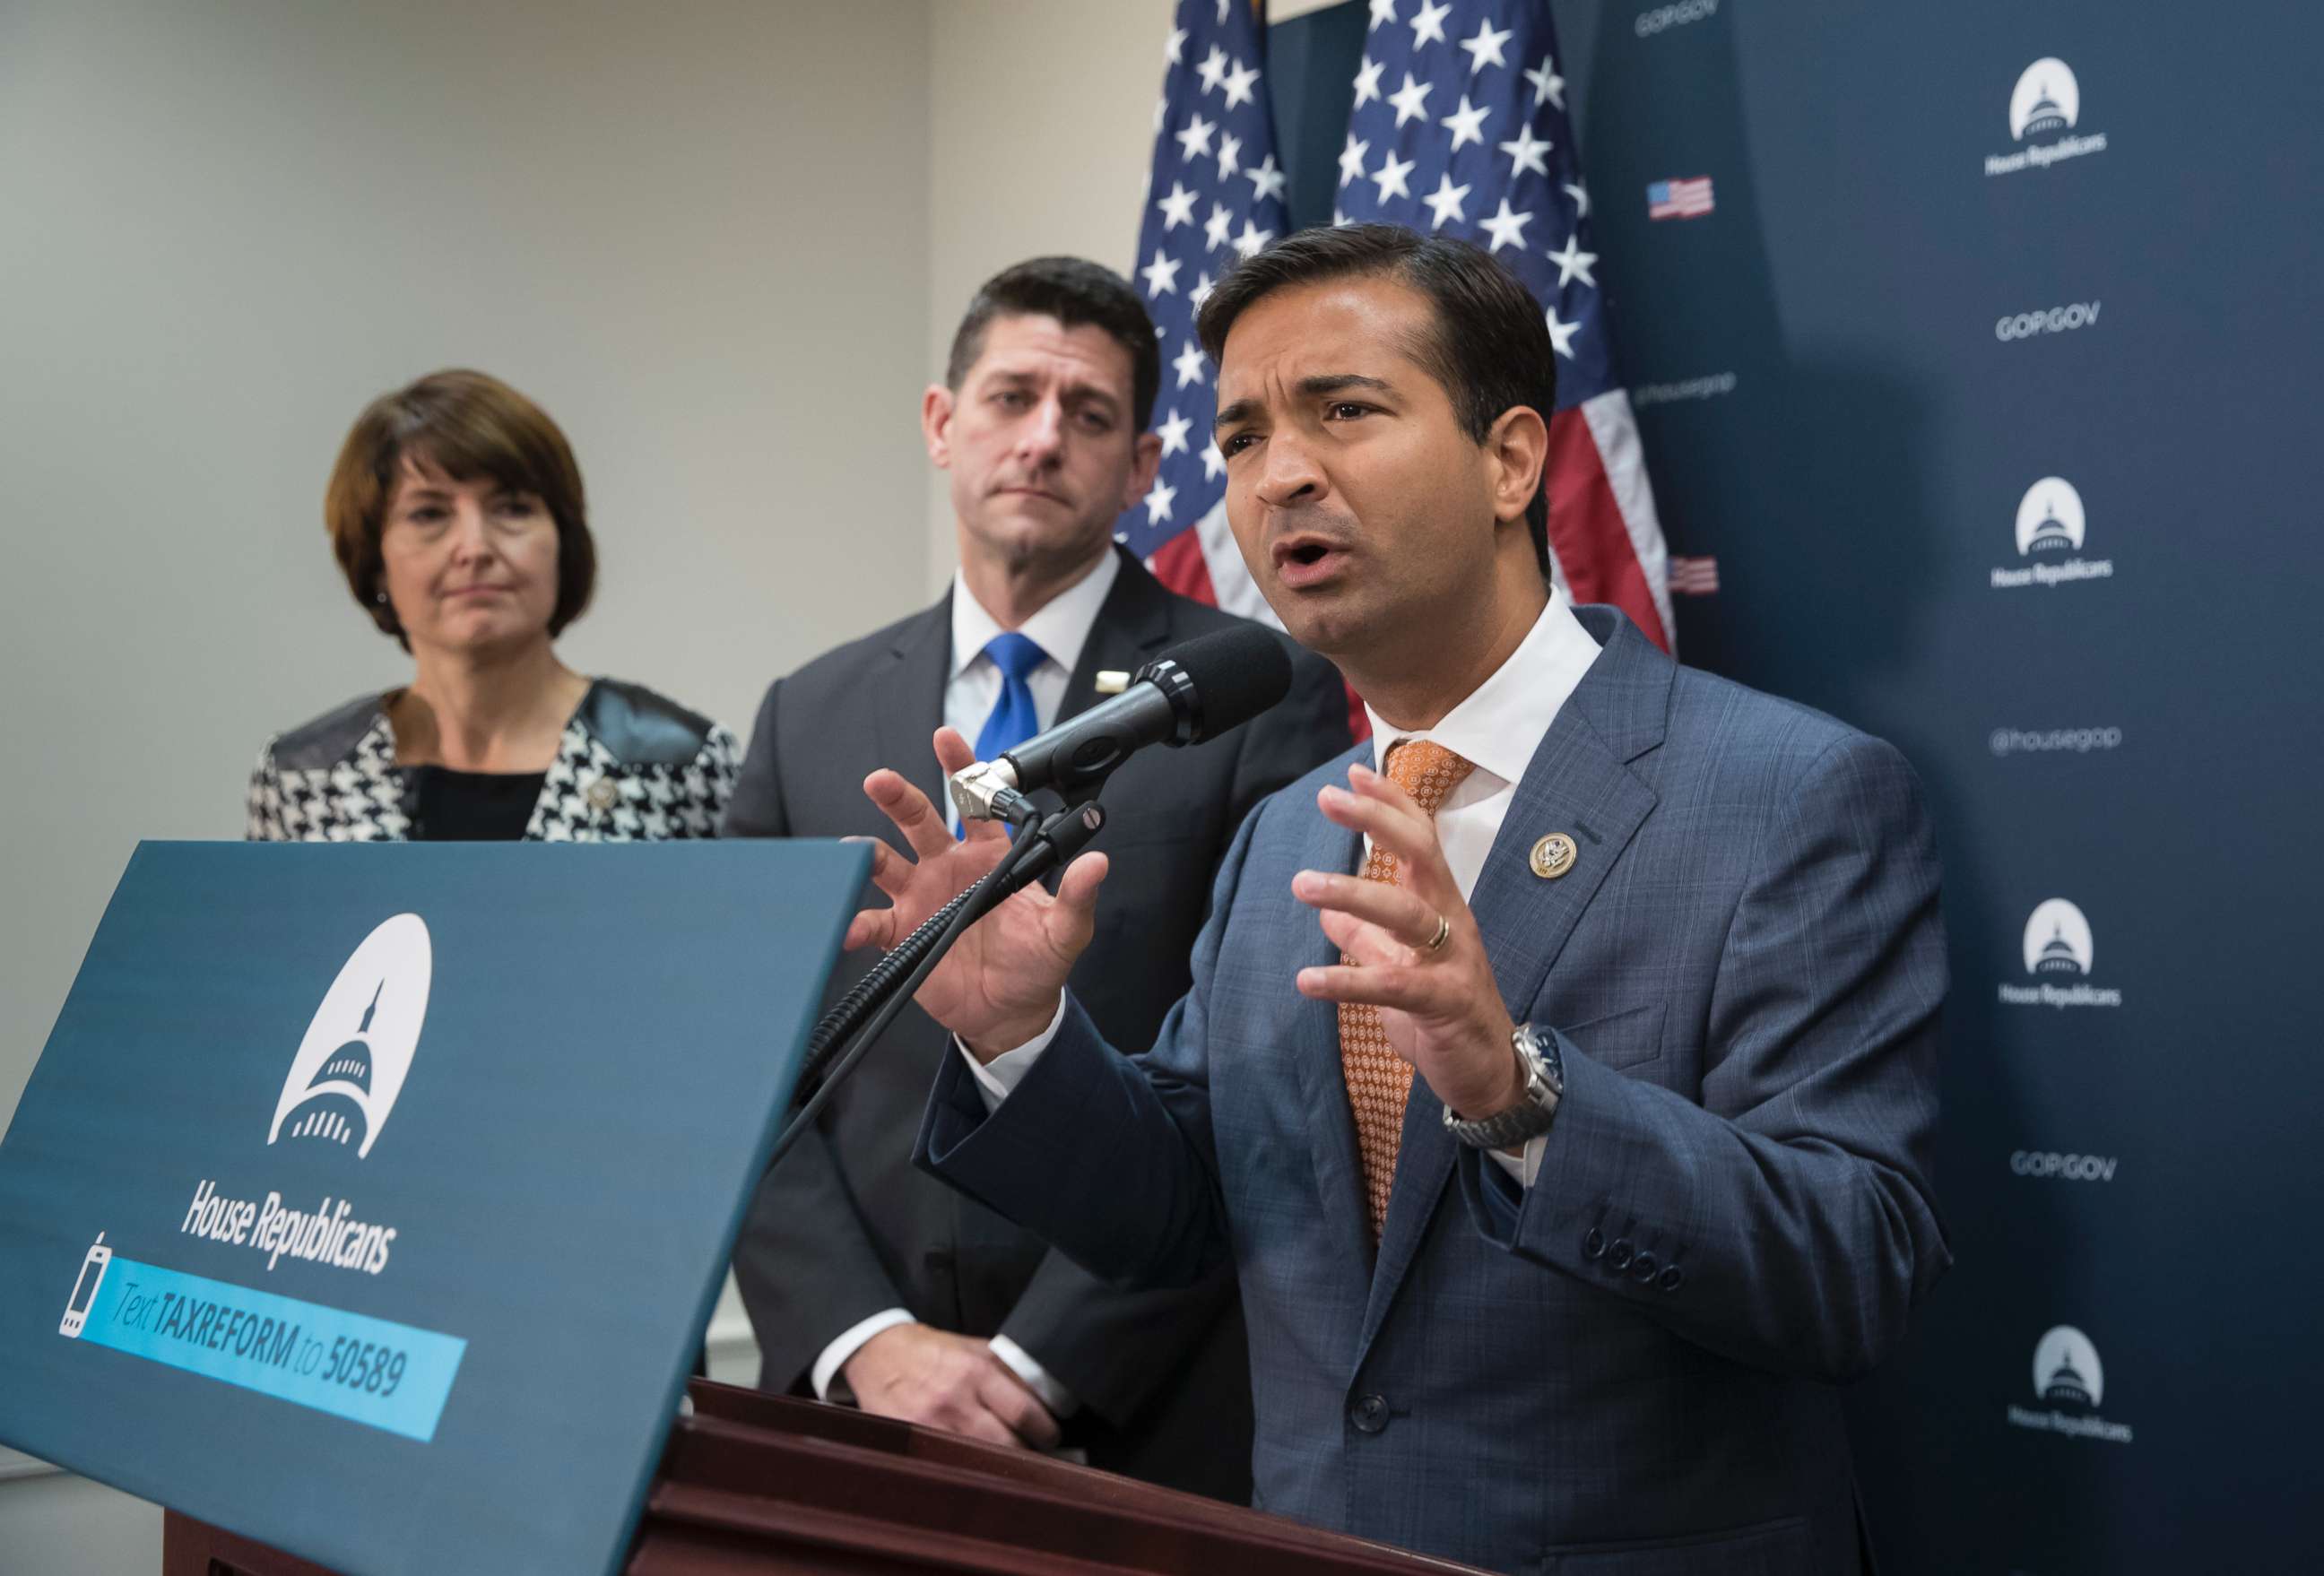 PHOTO: Rep. Carlos Curbelo, R-Fla., a member of the House Ways and Means Committee, is joined by, from left, Rep. Cathy McMorris Rodgers, R-Wash., and Speaker of the House Paul Ryan, R-Wis., on Capitol Hill in Washington, Oct. 24, 2017.